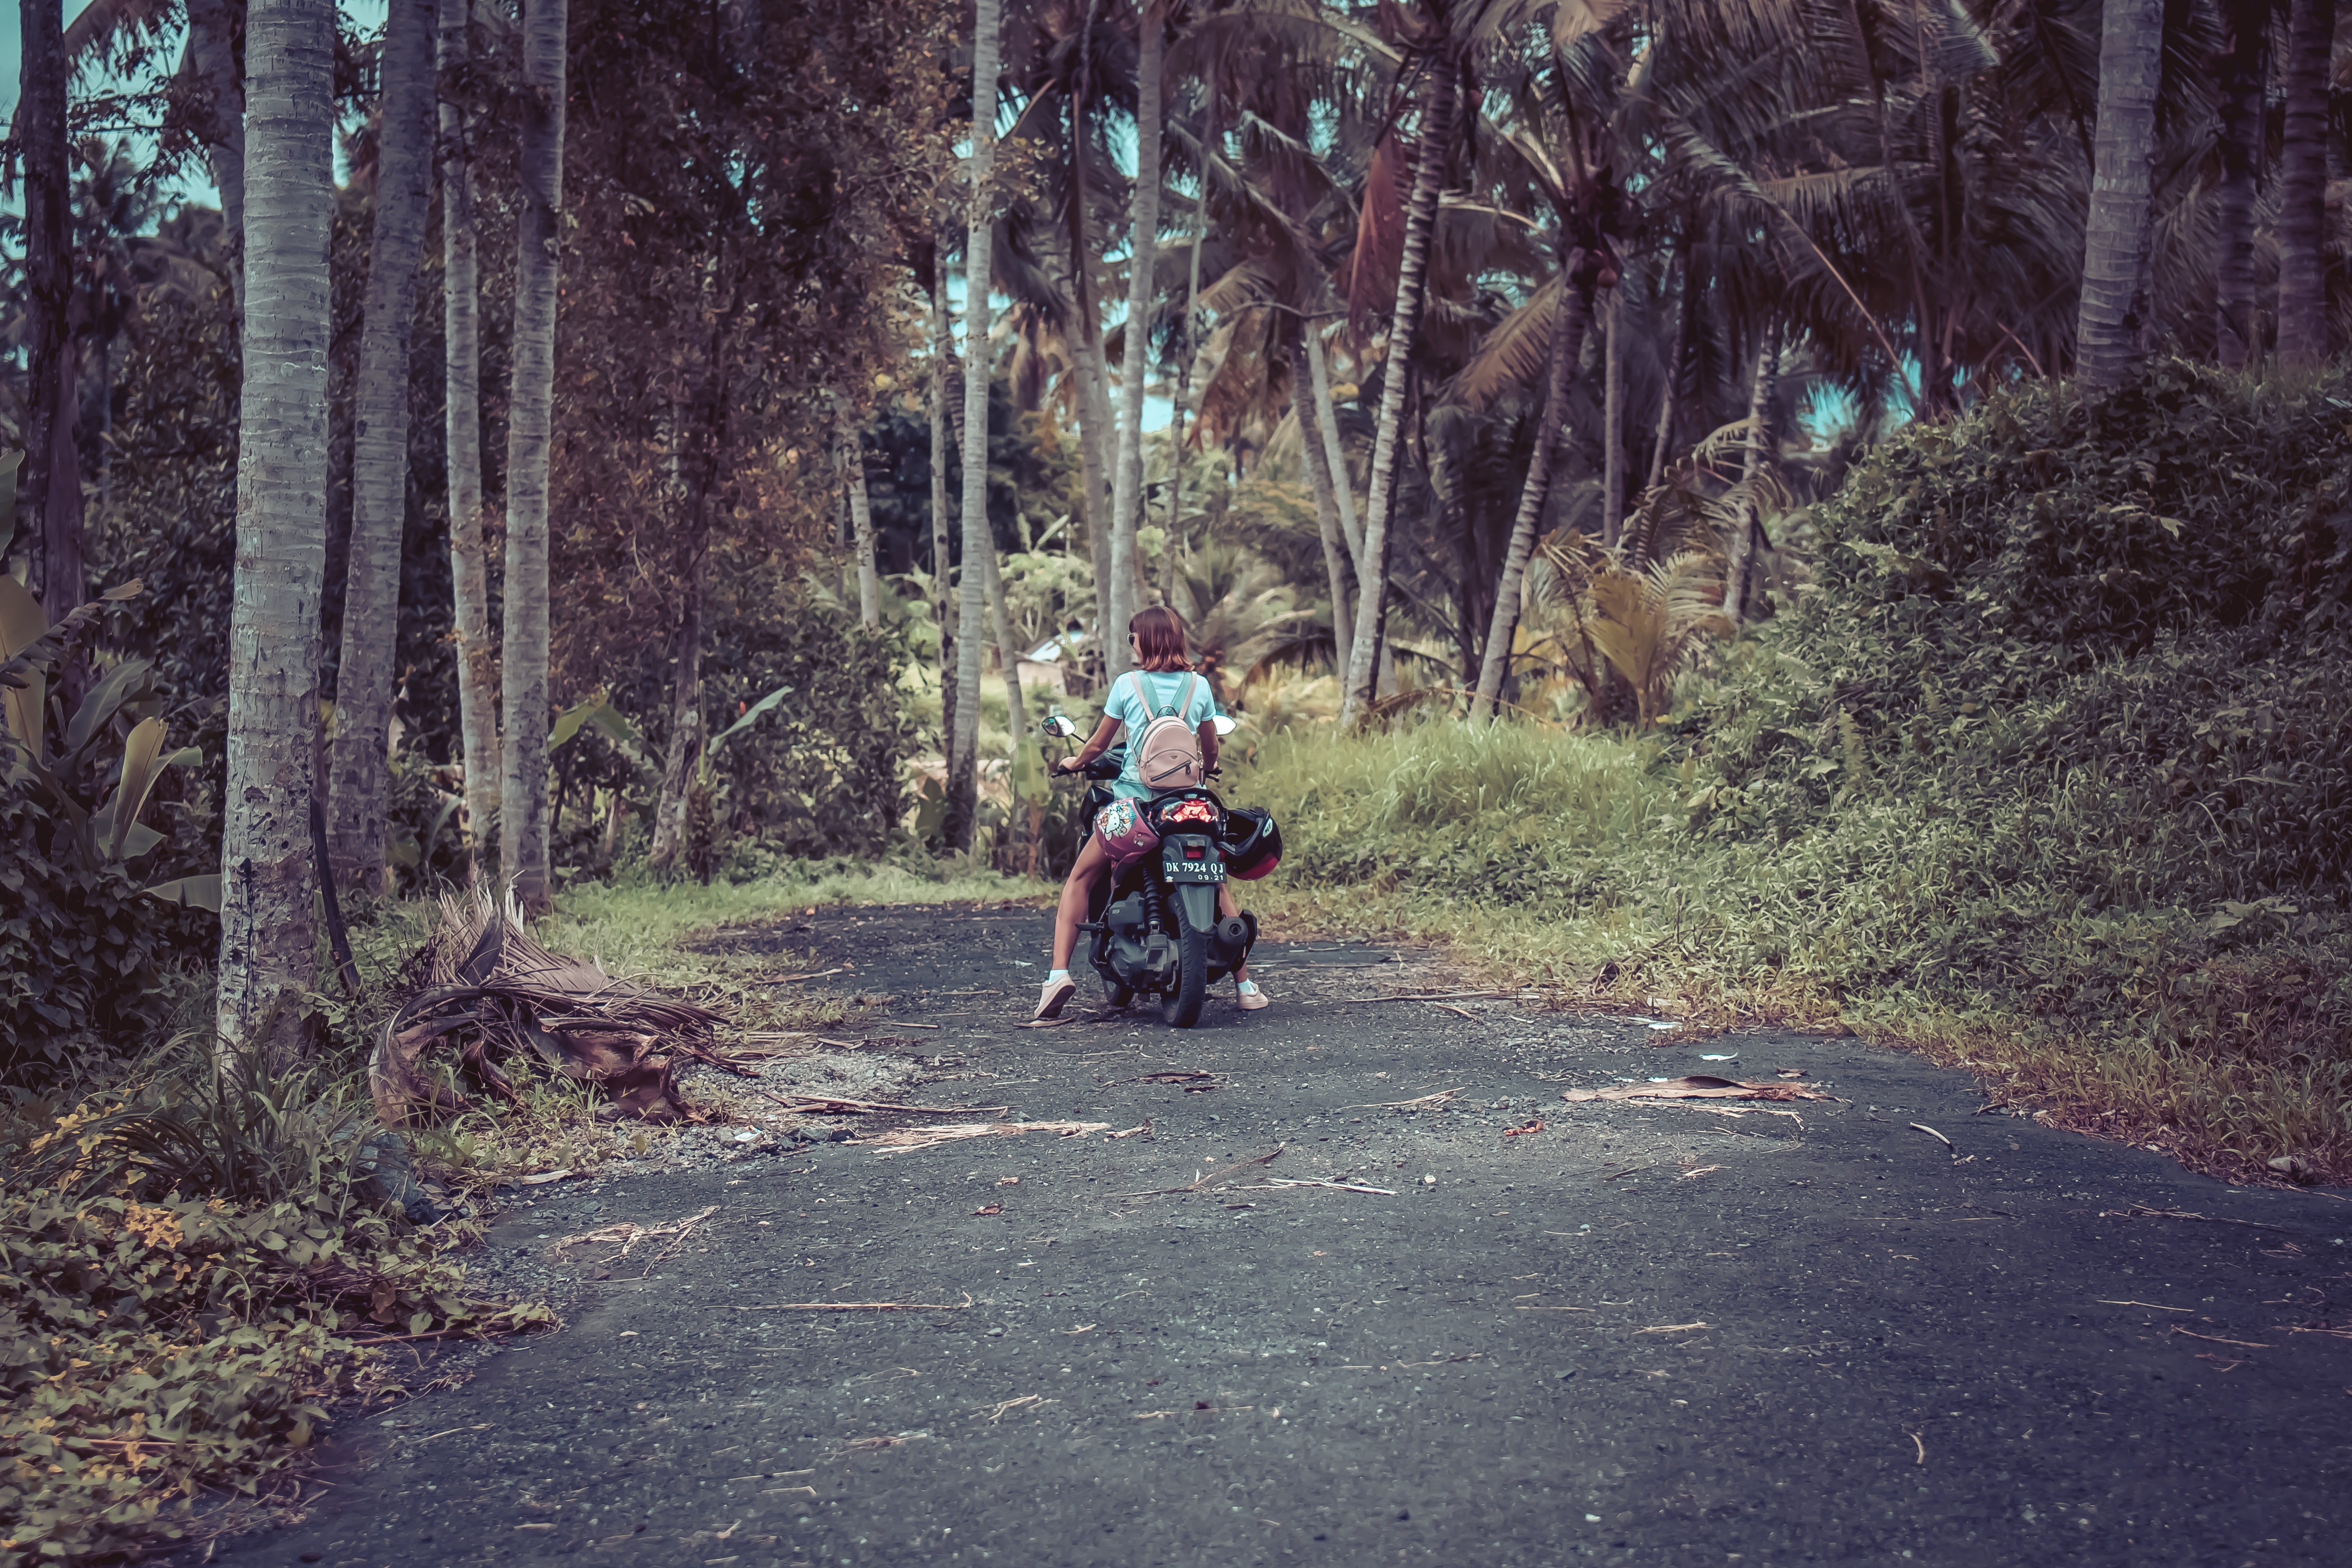 Woman Riding Motor Scooter Near Coconut Trees, Action, Trail, Road, Safety, HQ Photo